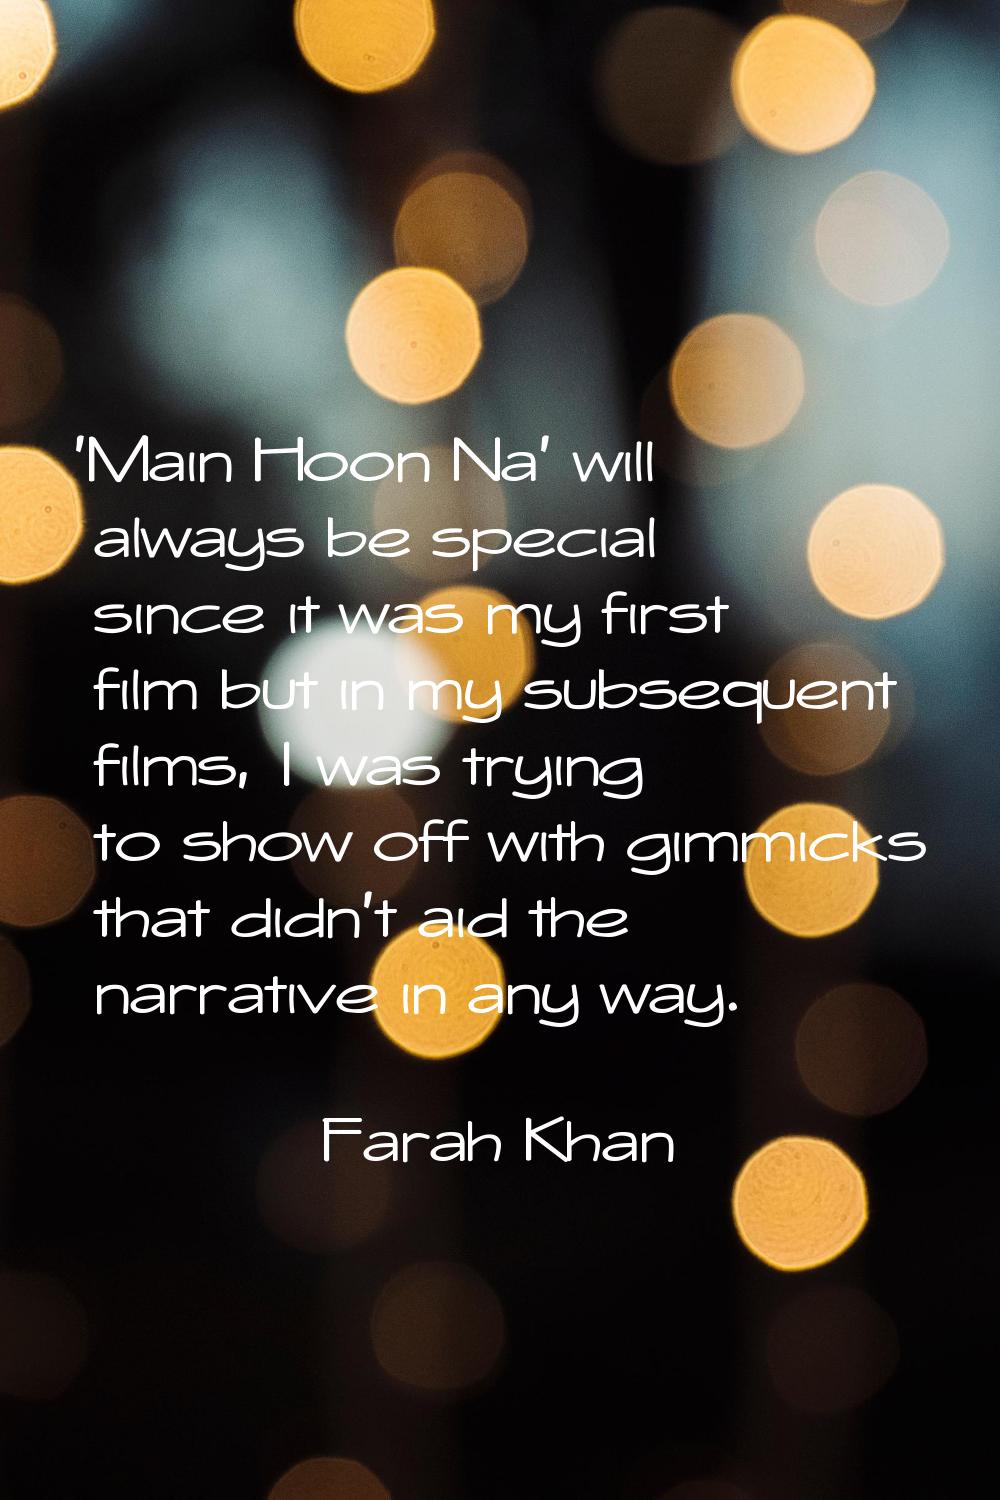 ‘Main Hoon Na' will always be special since it was my first film but in my subsequent films, I was 